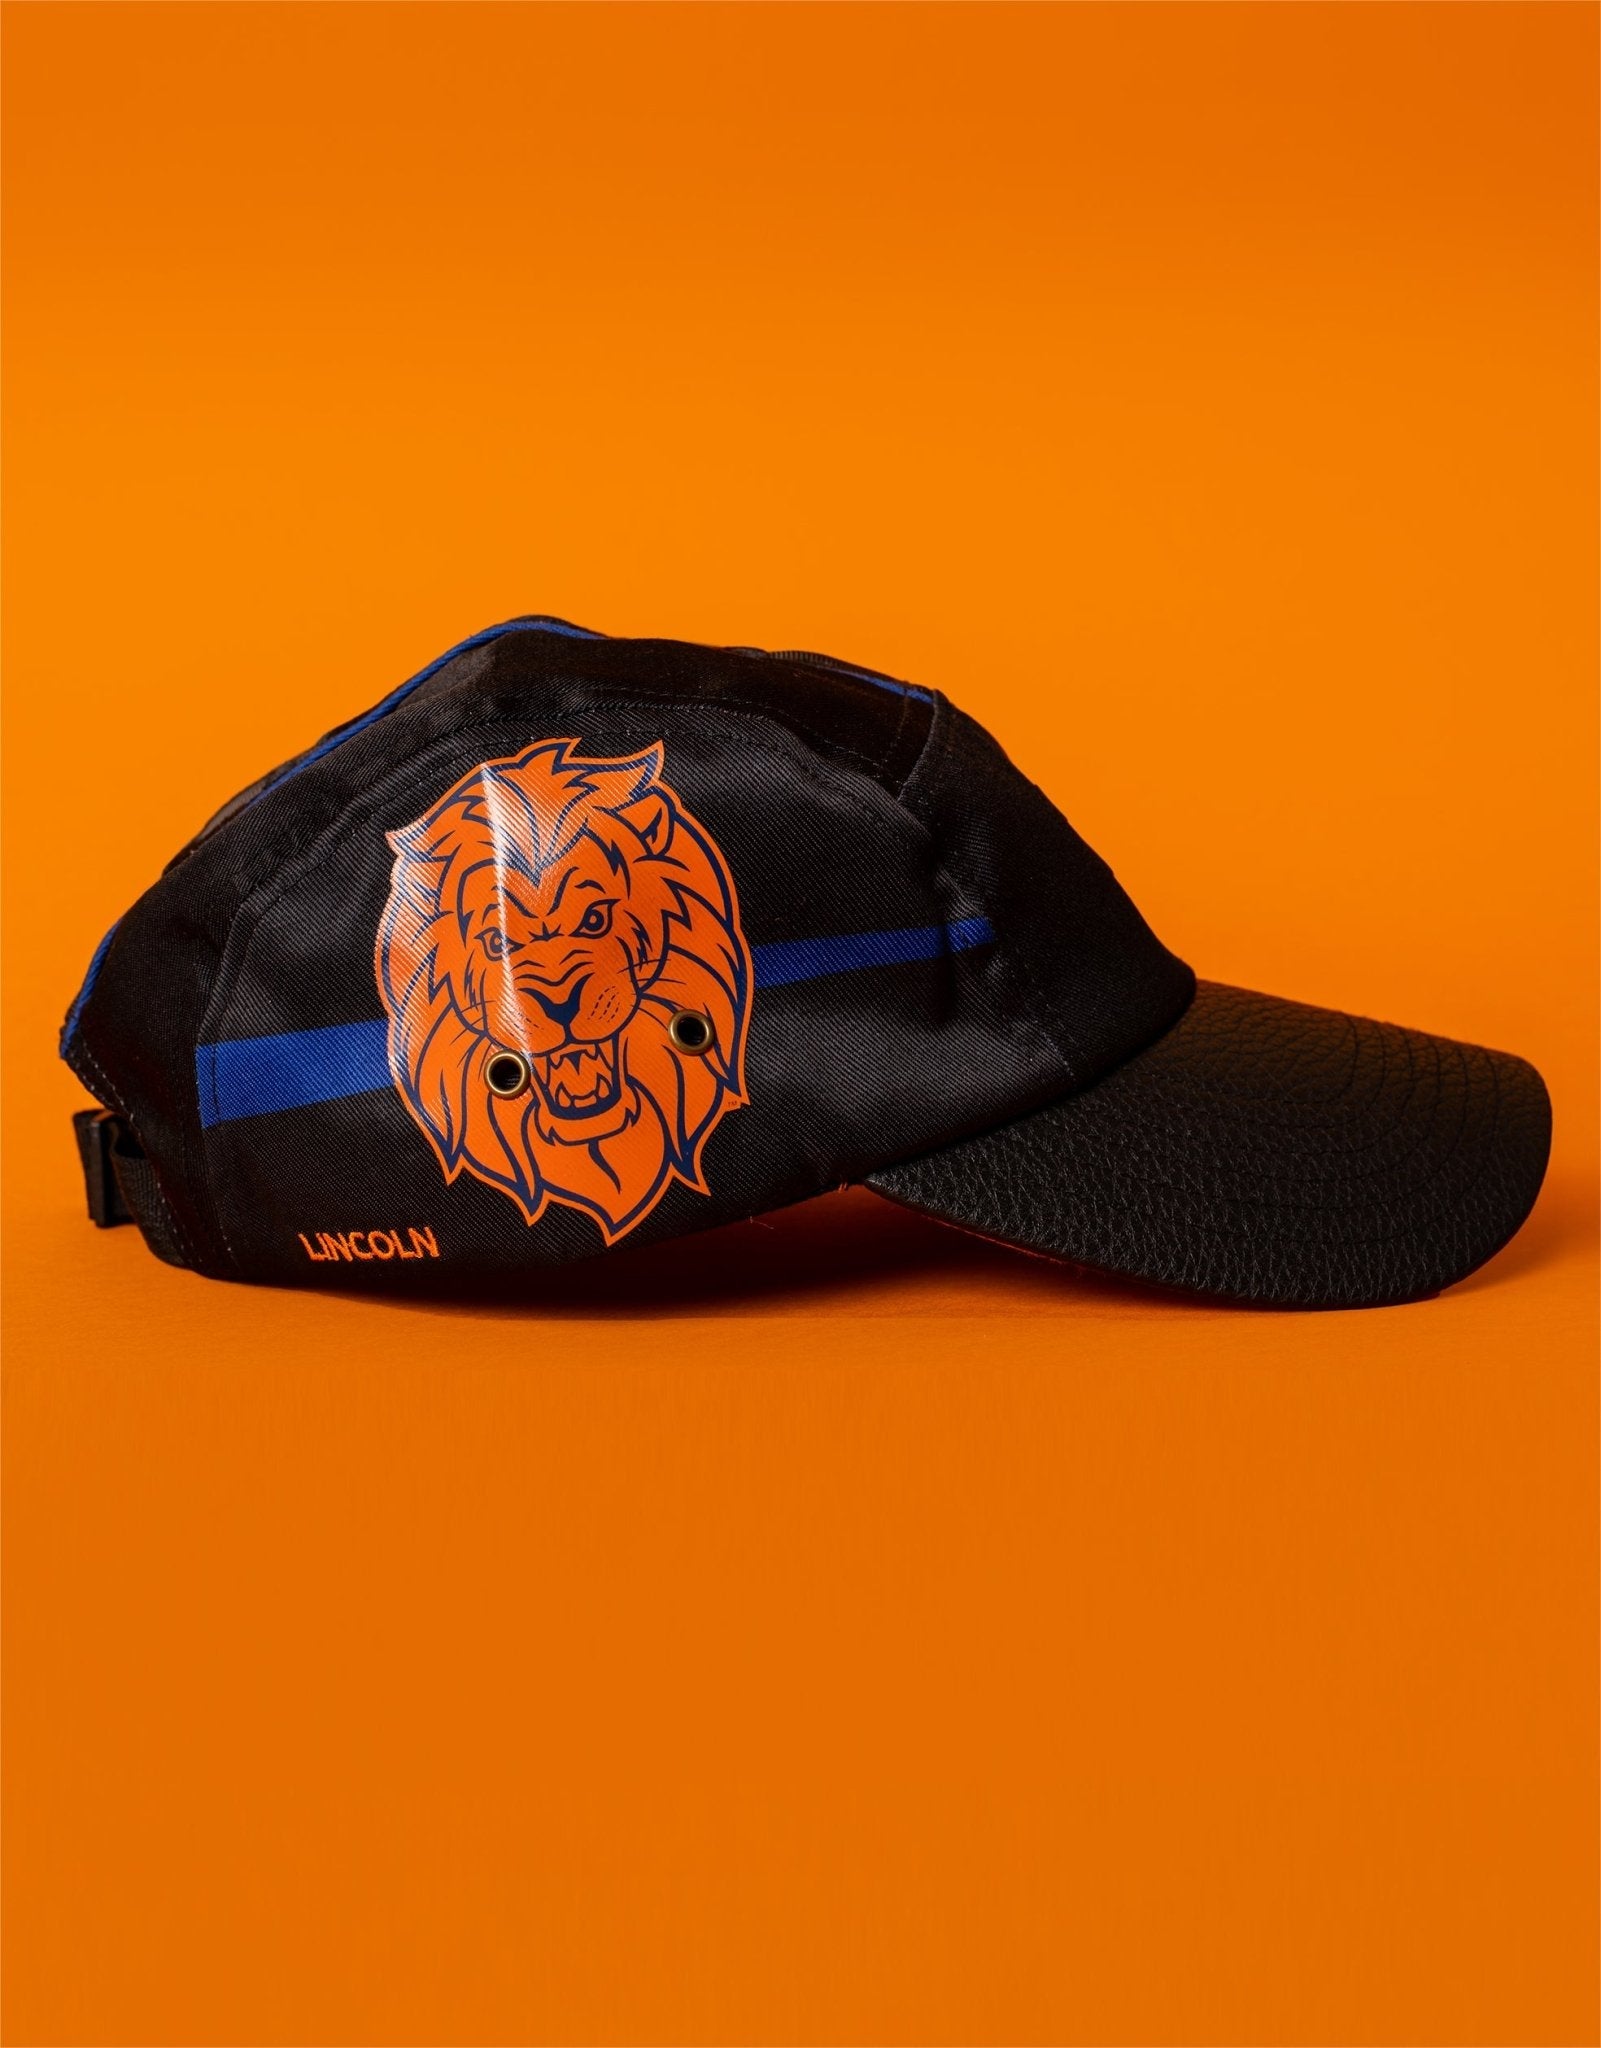 Lincoln University - HBCU Hat - TheYard Blackout